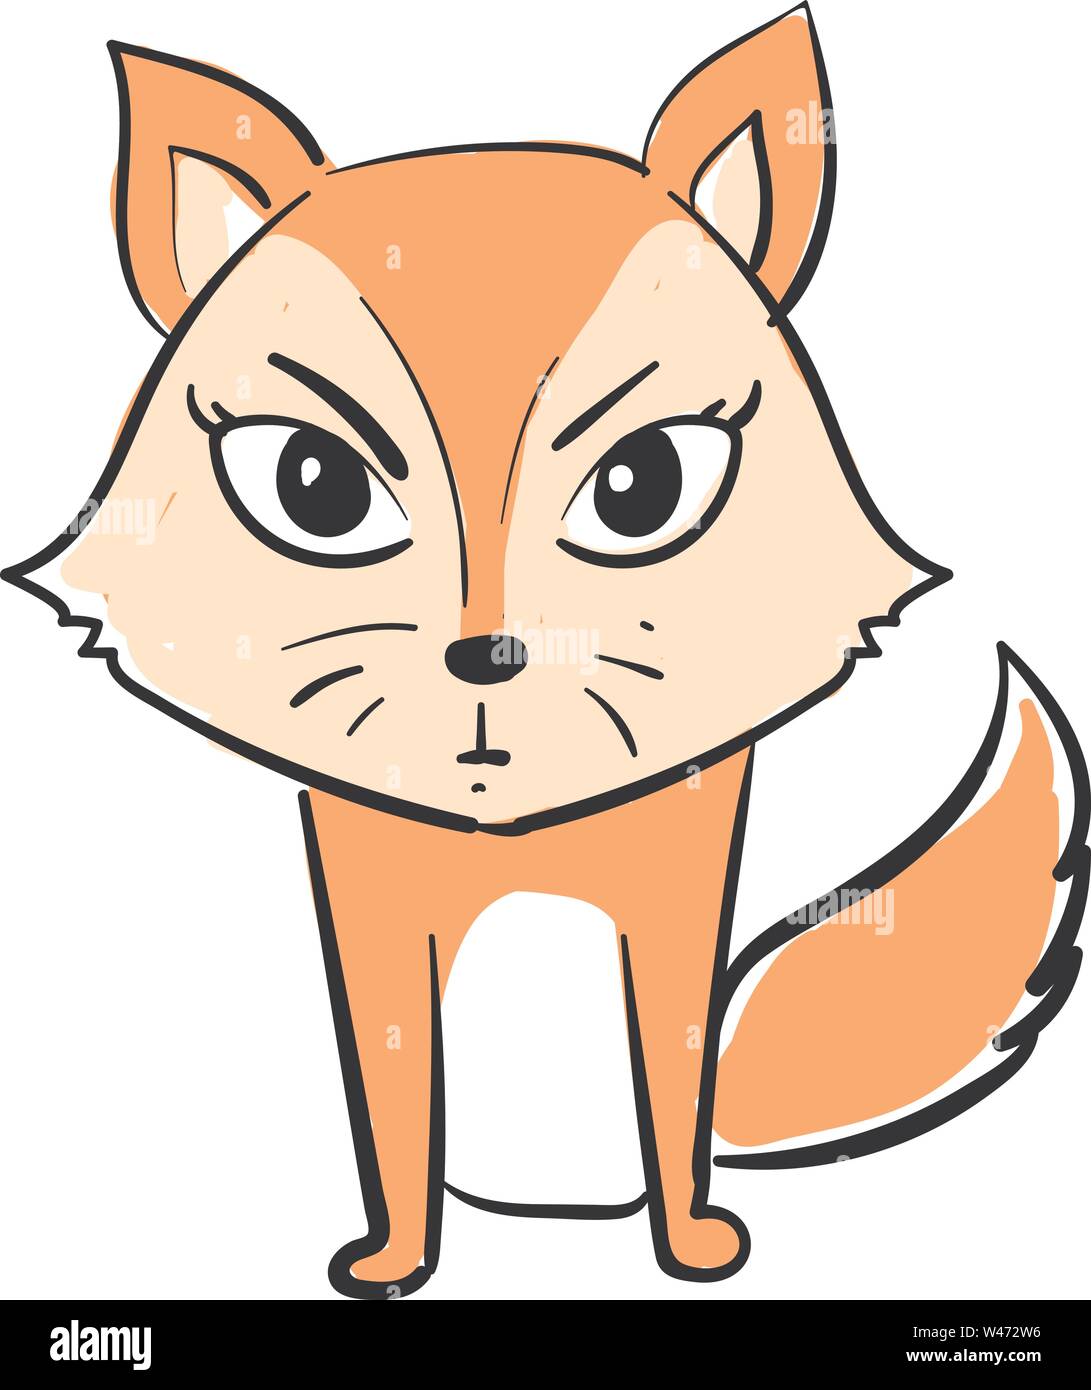 How to Draw a cute Fox (EASY) - YouTube